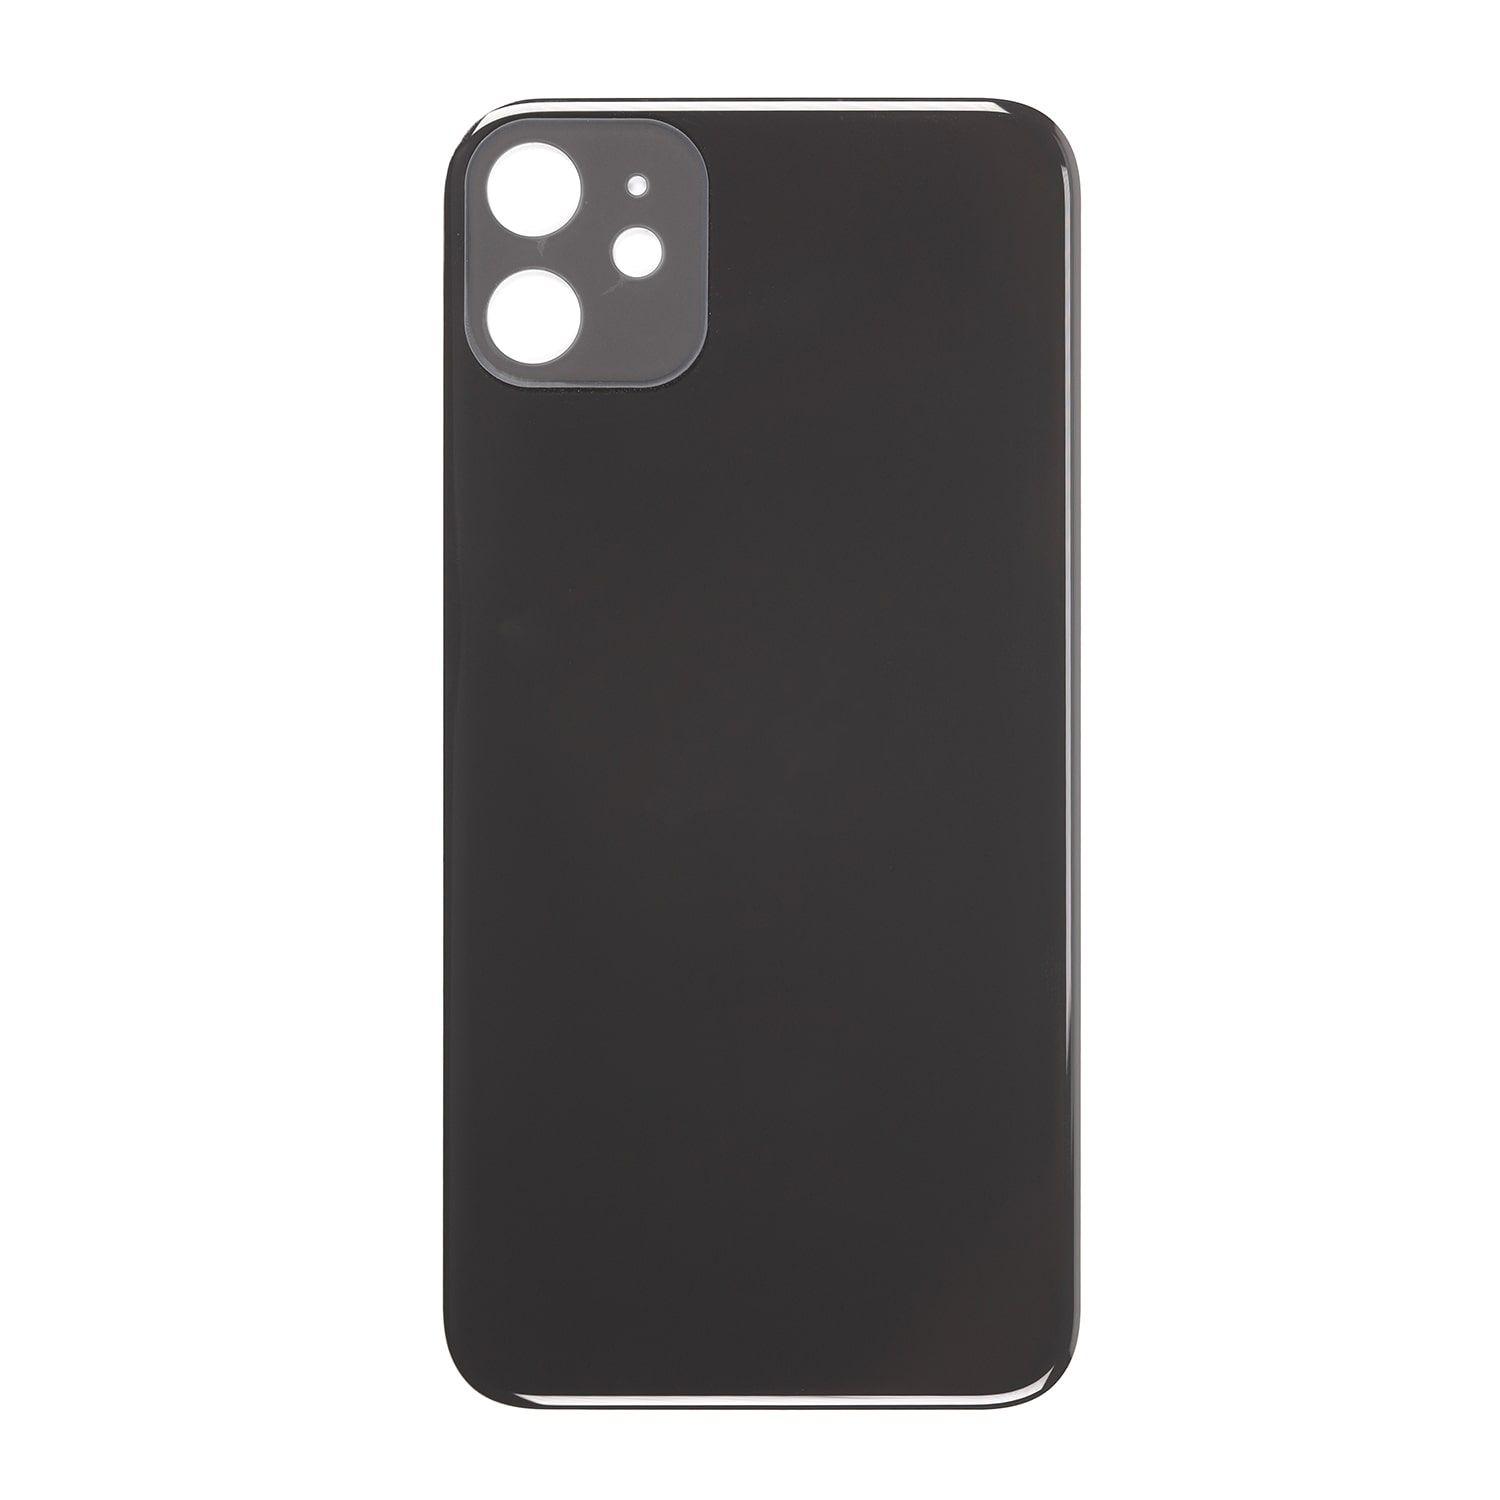 Battery cover iPhone 11 with bigger hole for camera - black